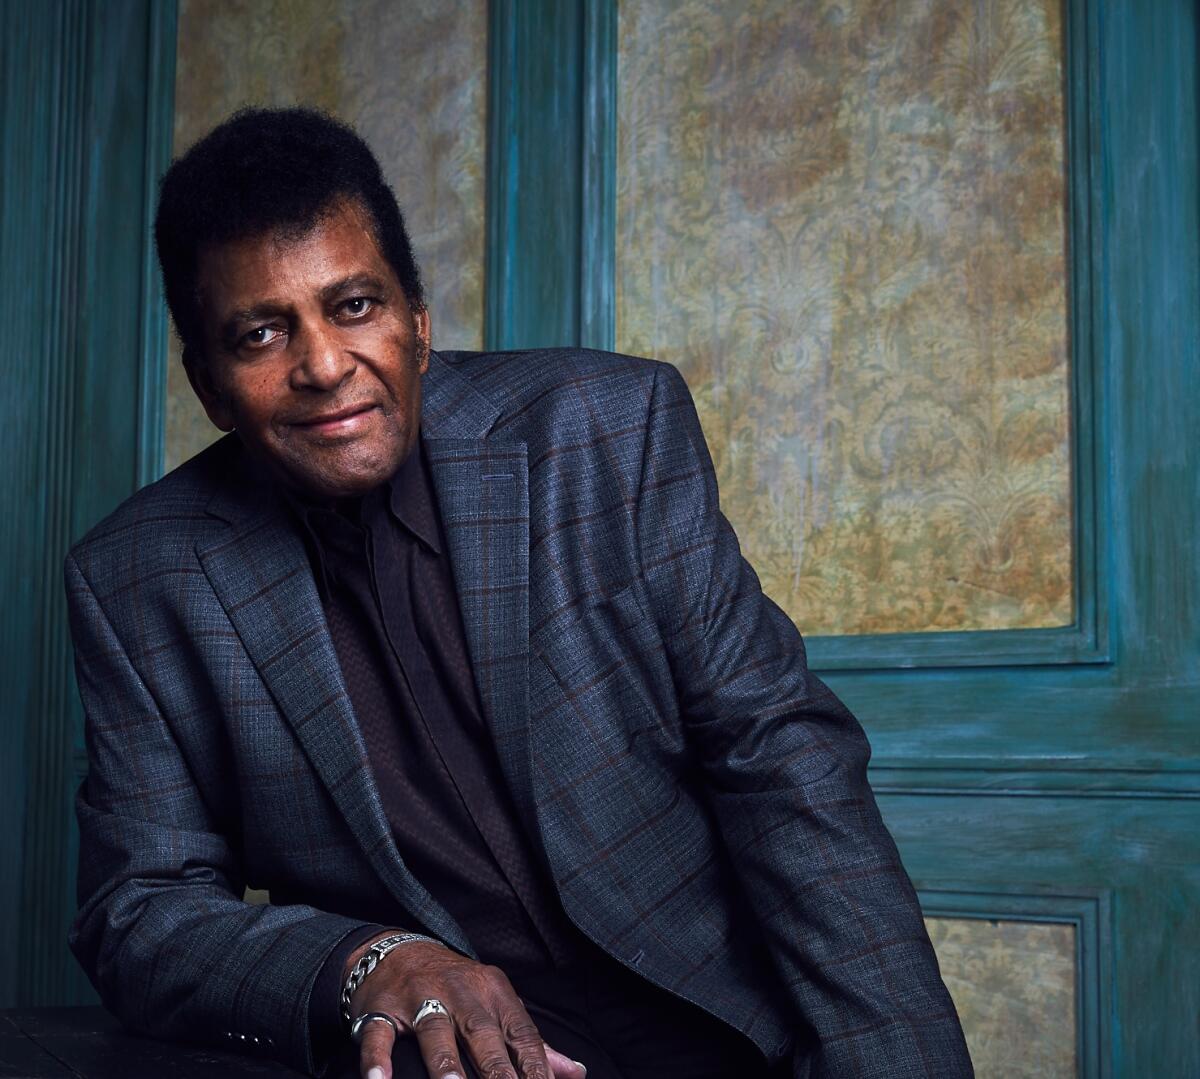 Charley Pride dons a blue jacket and tie in a formal portrait